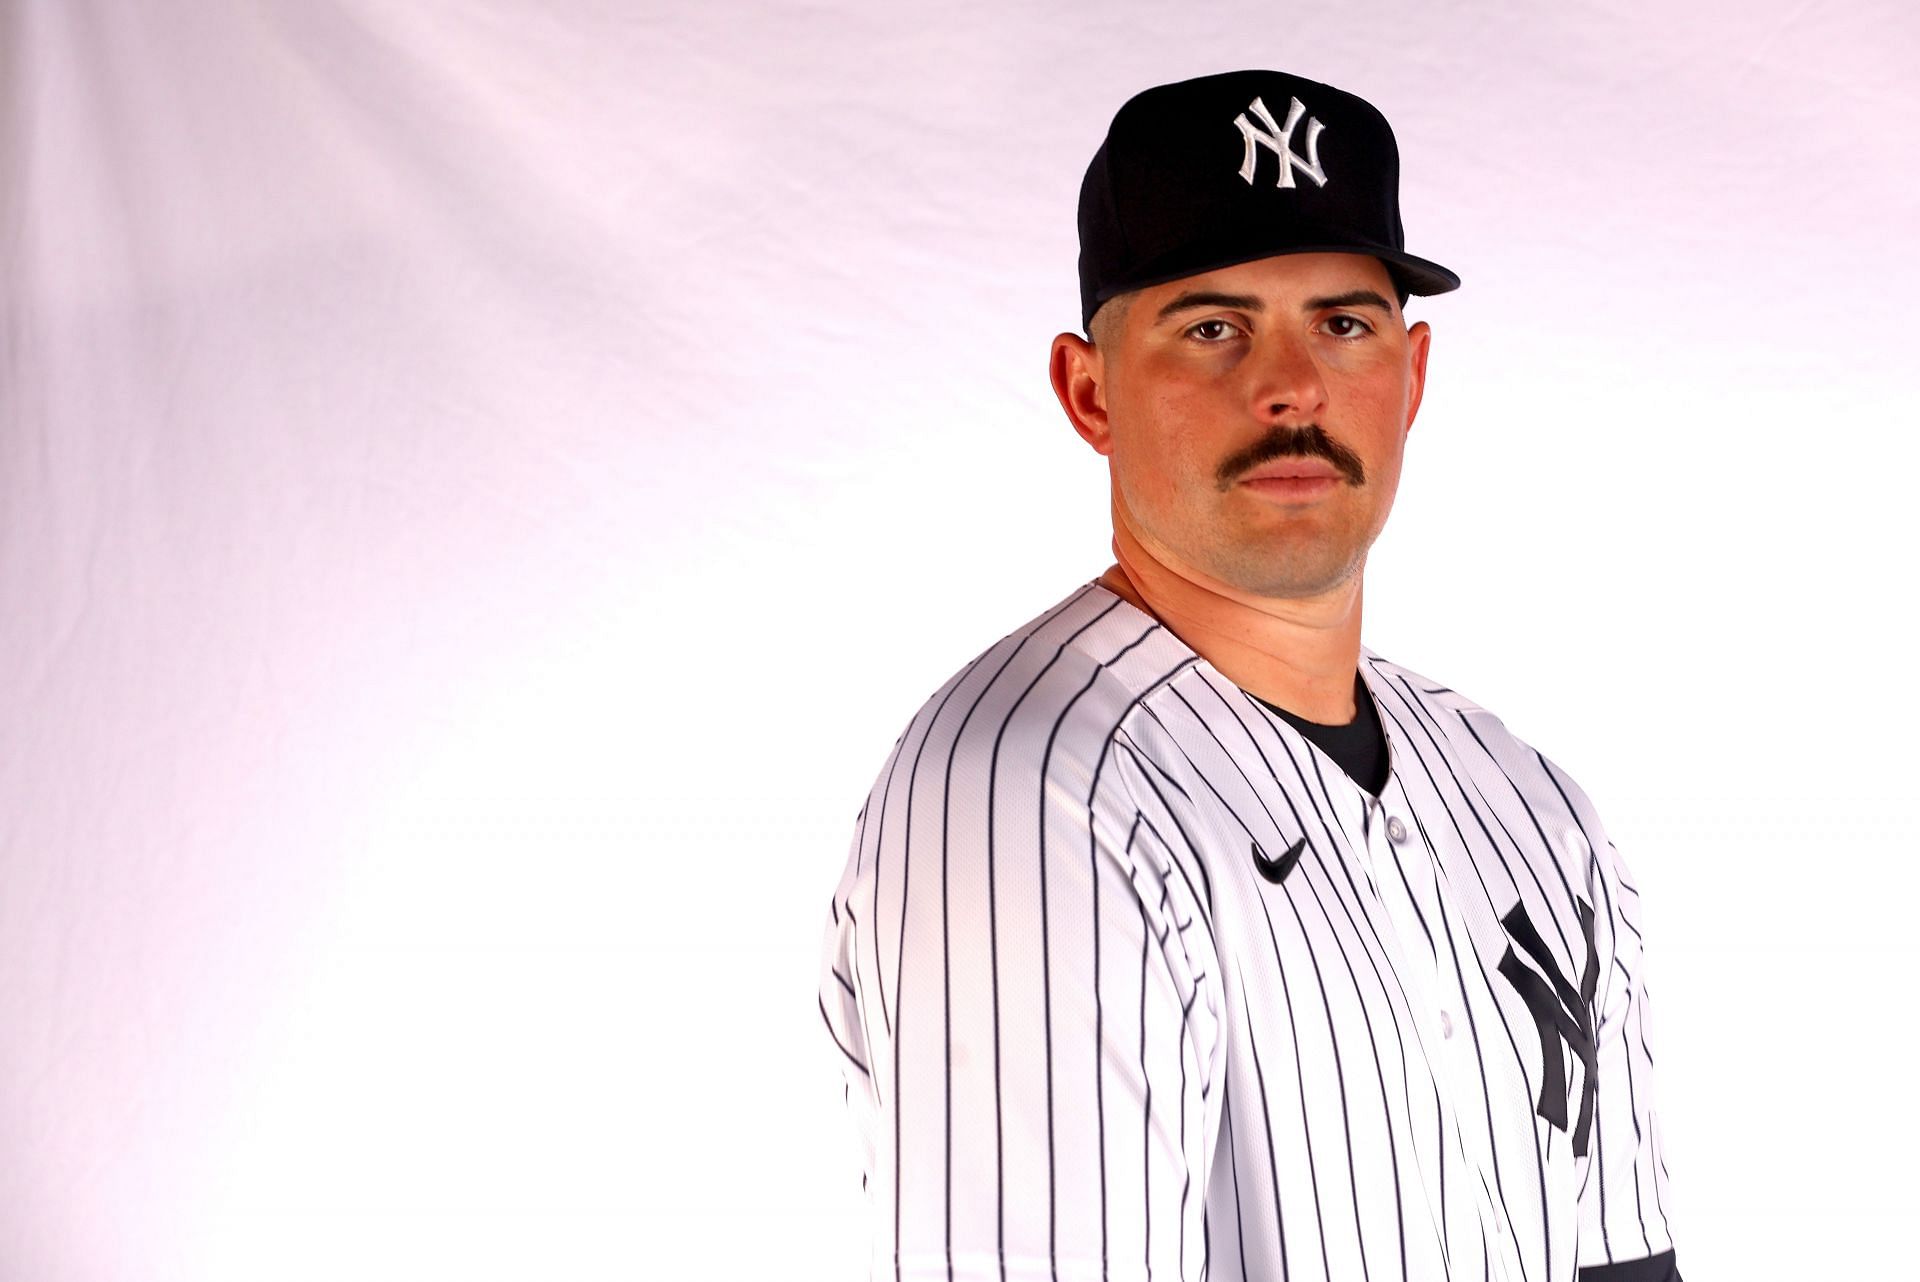 Carlos Rodon #55 of the New York Yankees poses for a portrait during media day